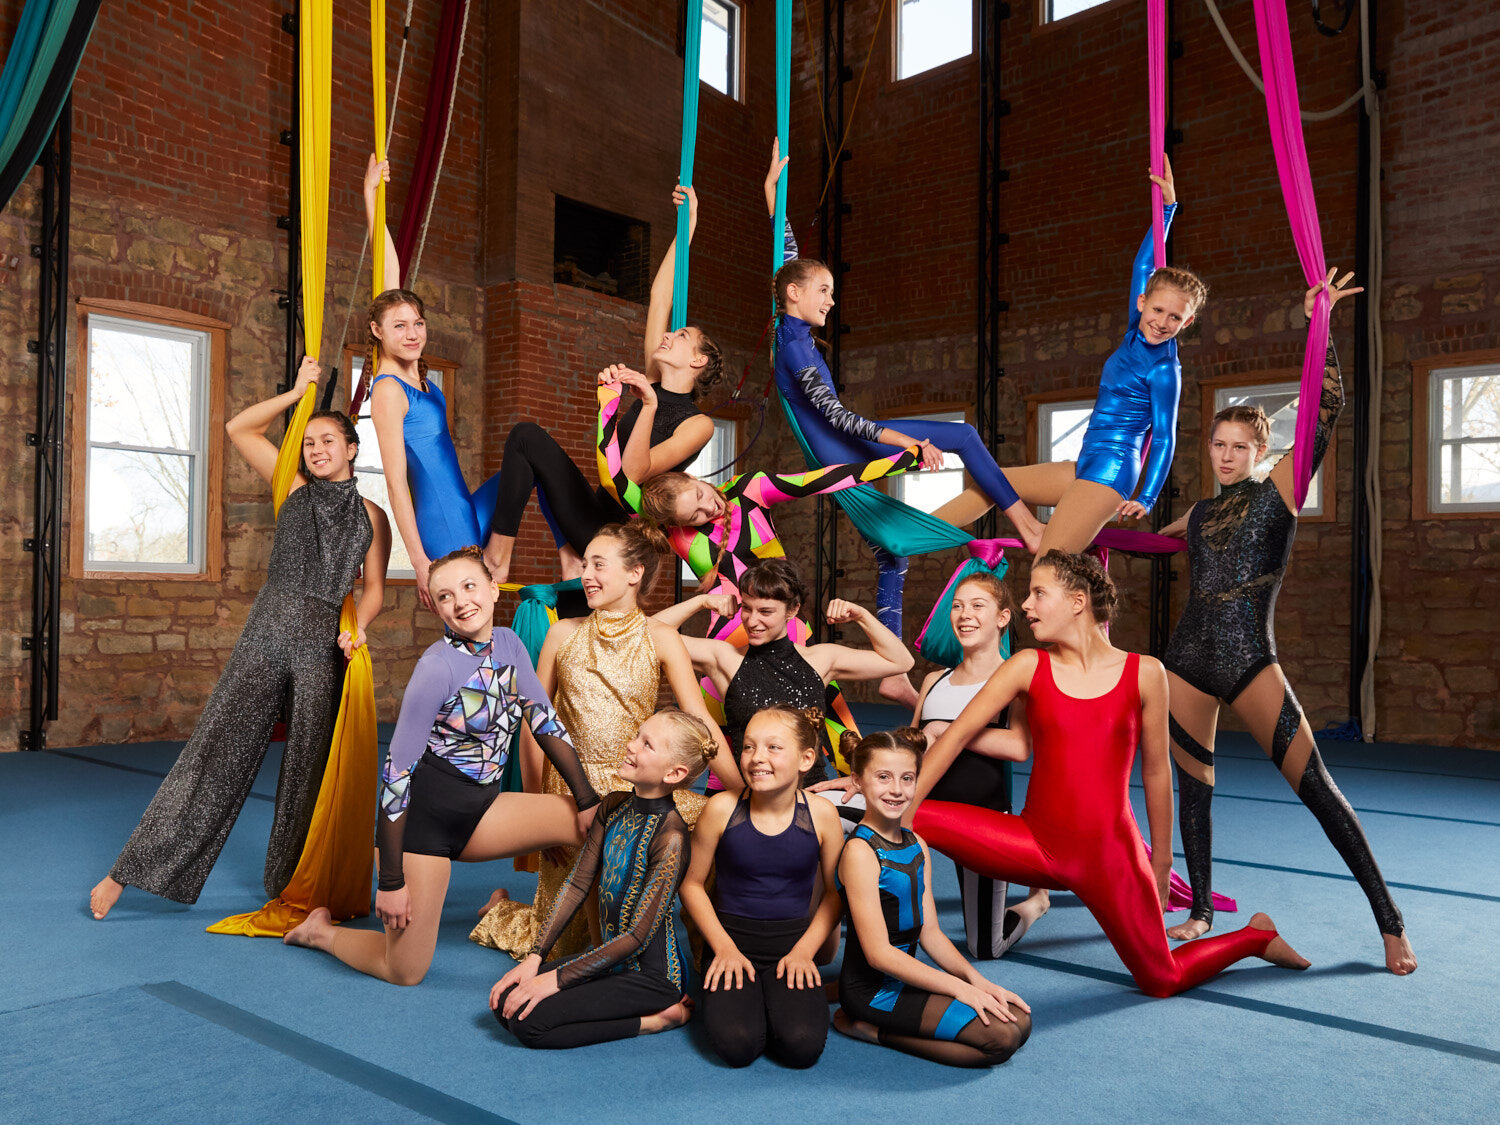 group photo of youth aerial circus group Bricolage Cirkus